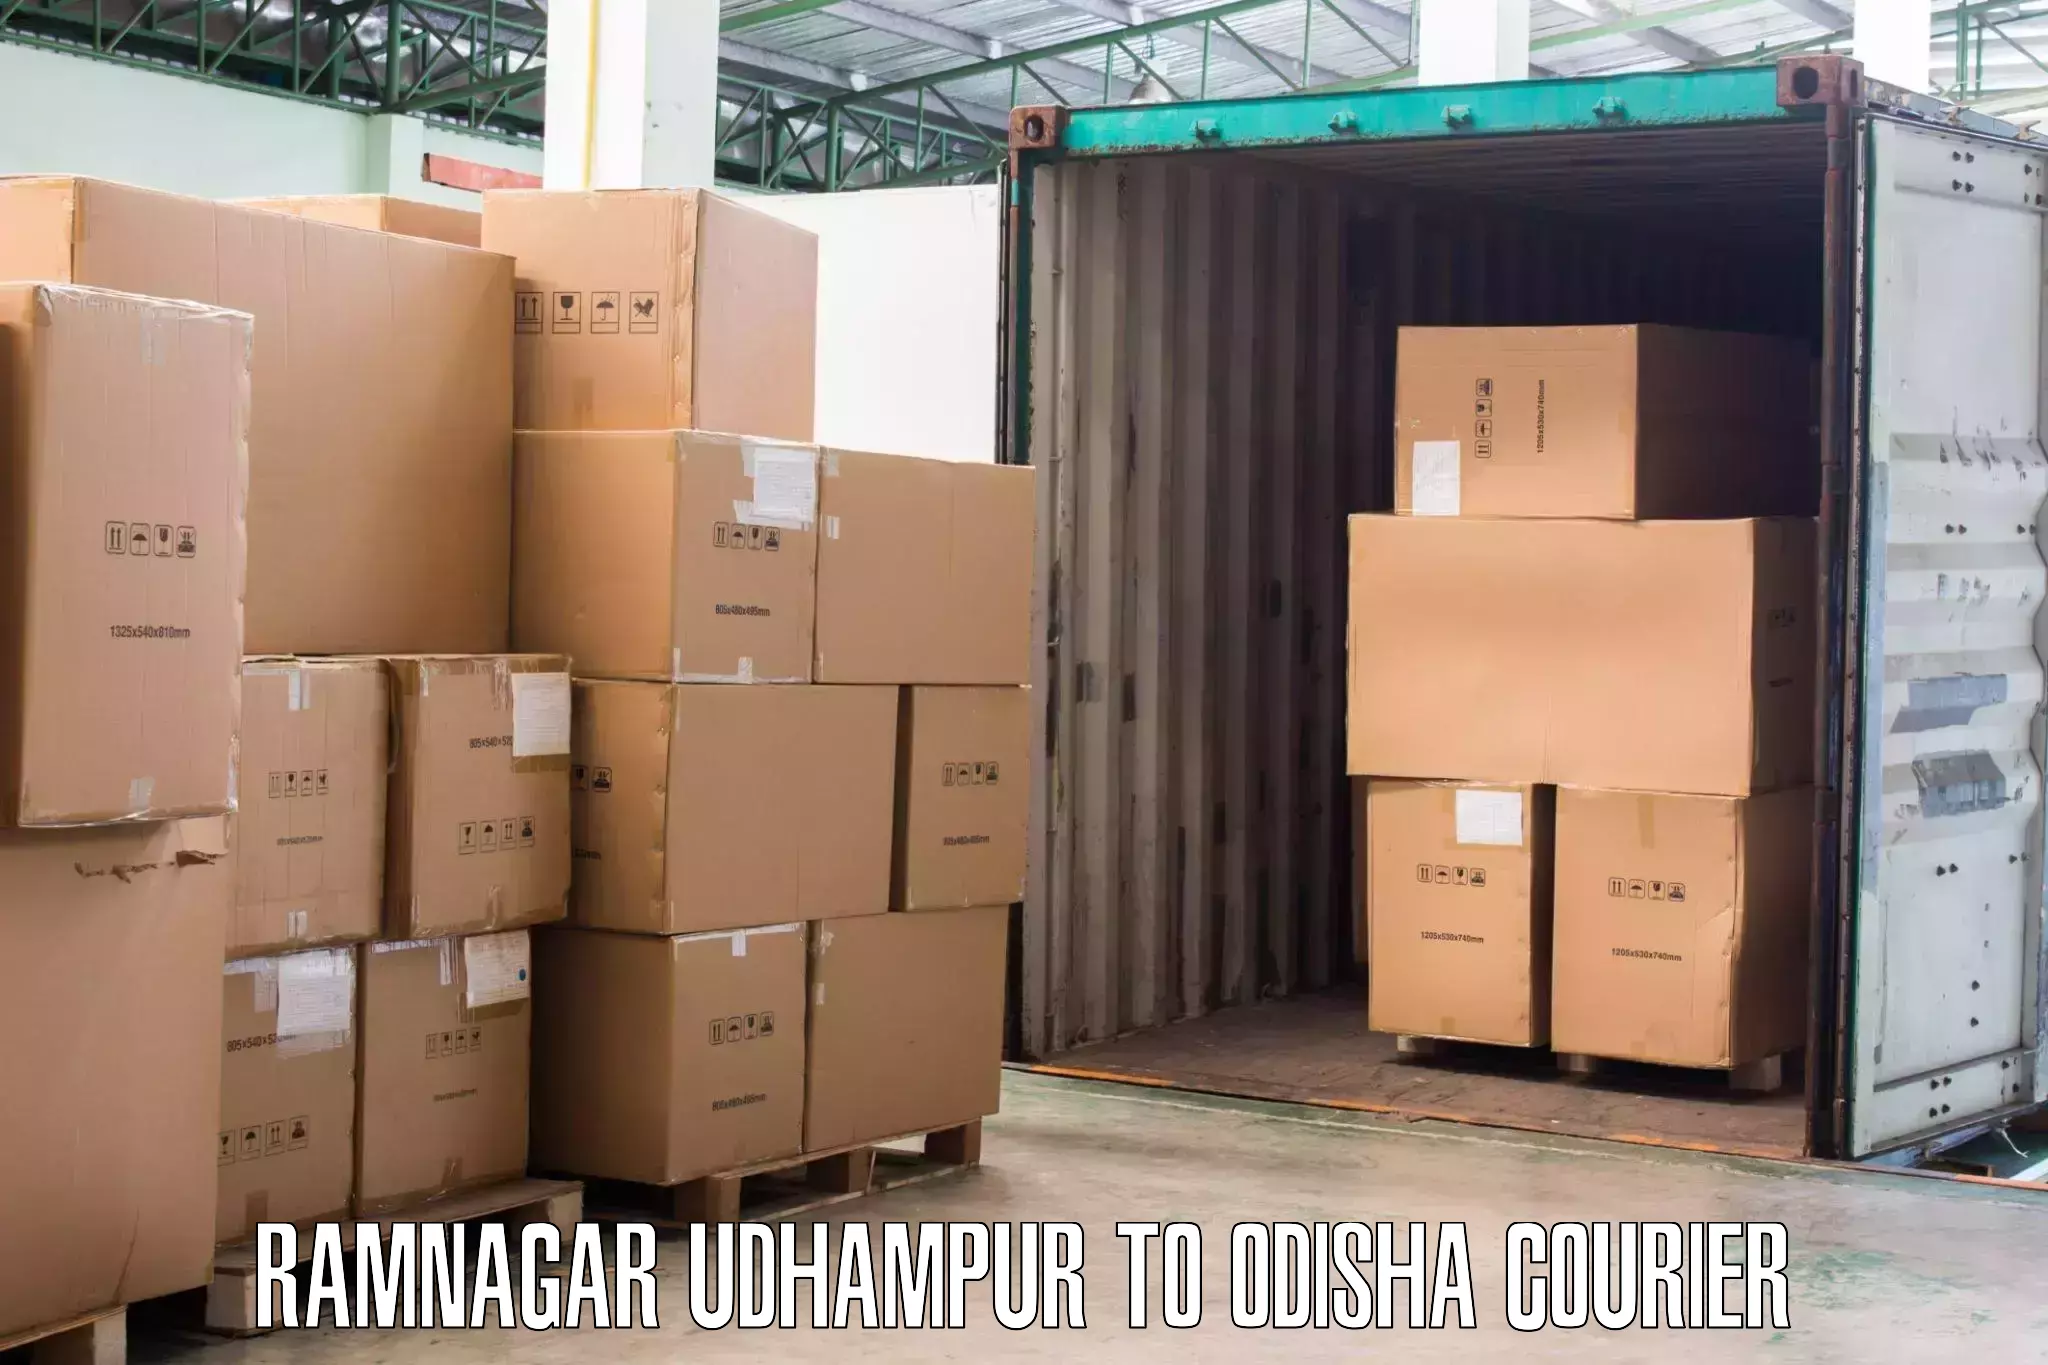 Hassle-free relocation Ramnagar Udhampur to Boudh